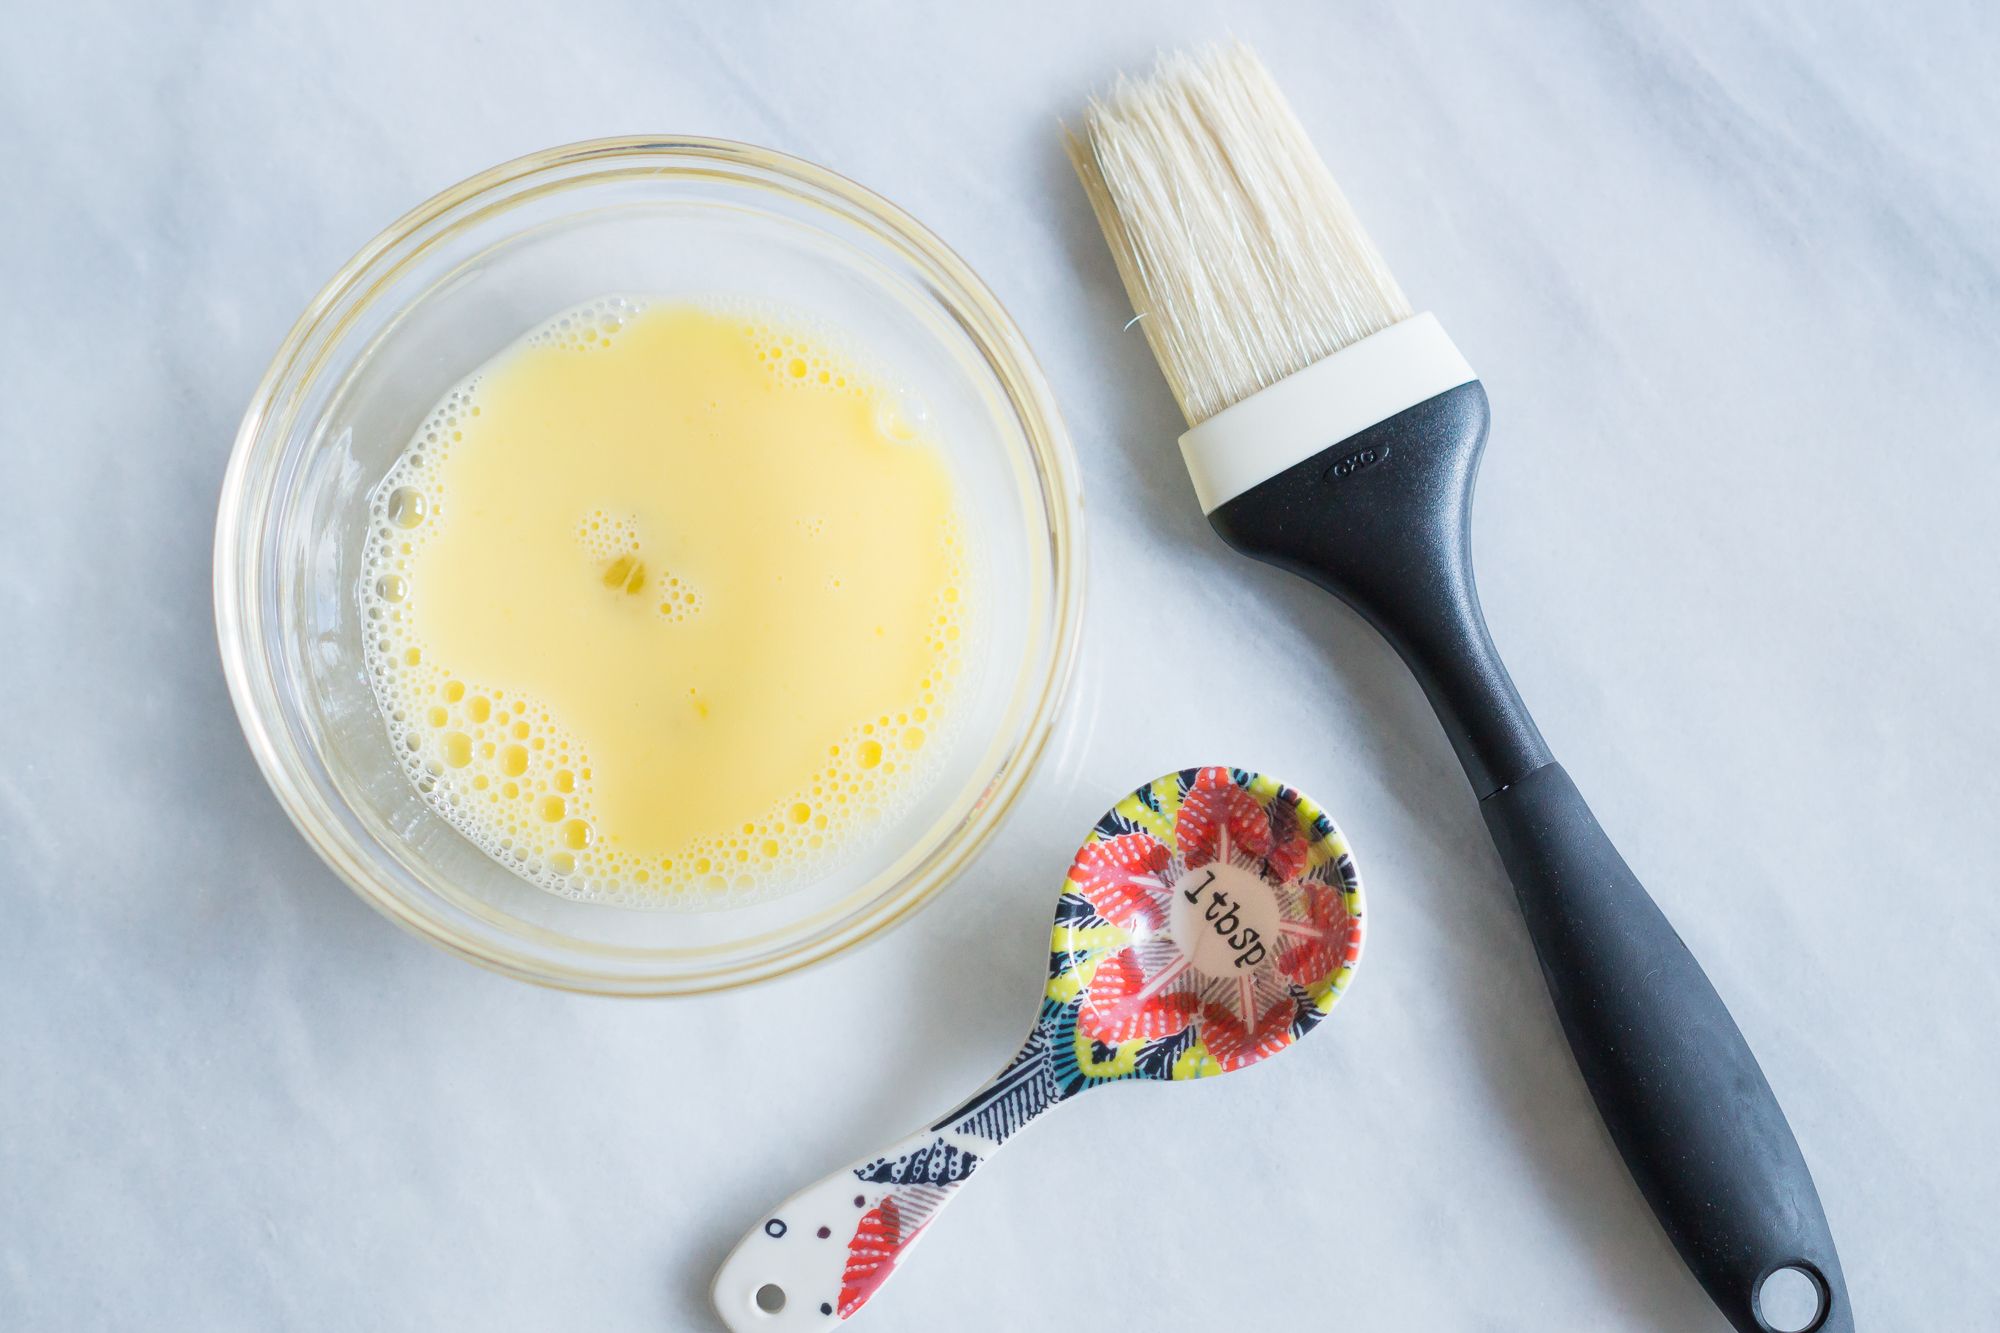 What To Look For In A Pastry Brush